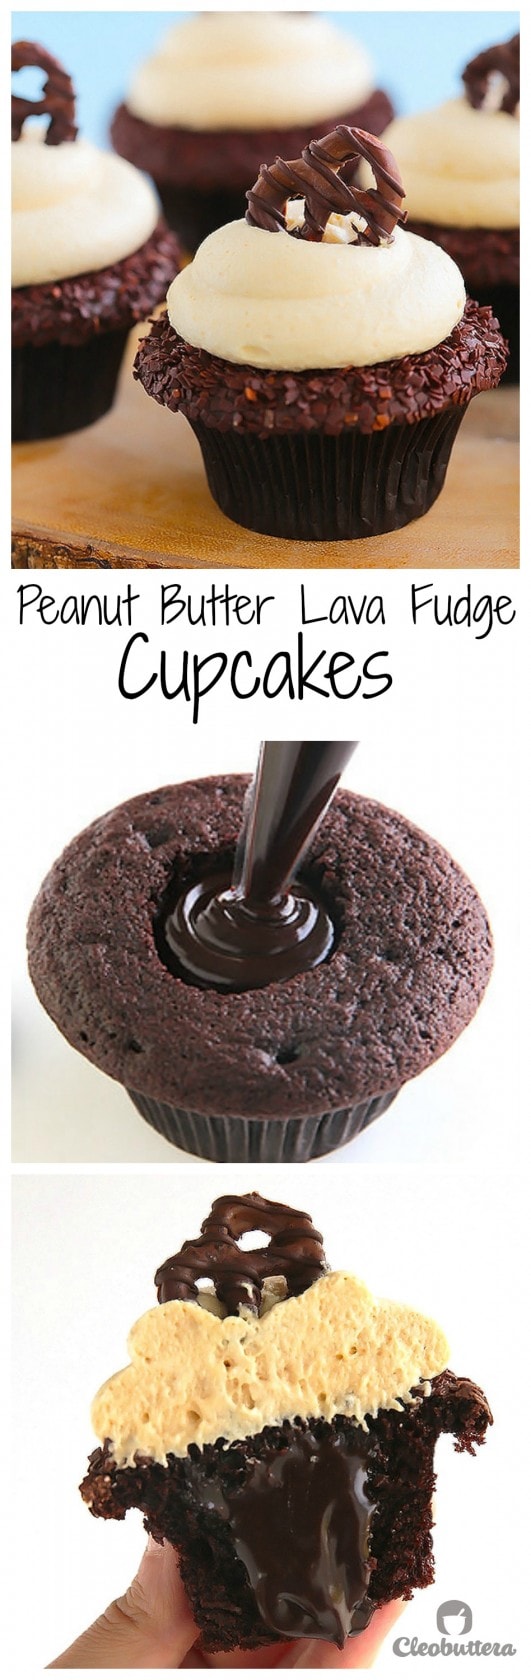 Peanut Butter Lava Cupcakes...these are the BEST Cupcake Ideas!